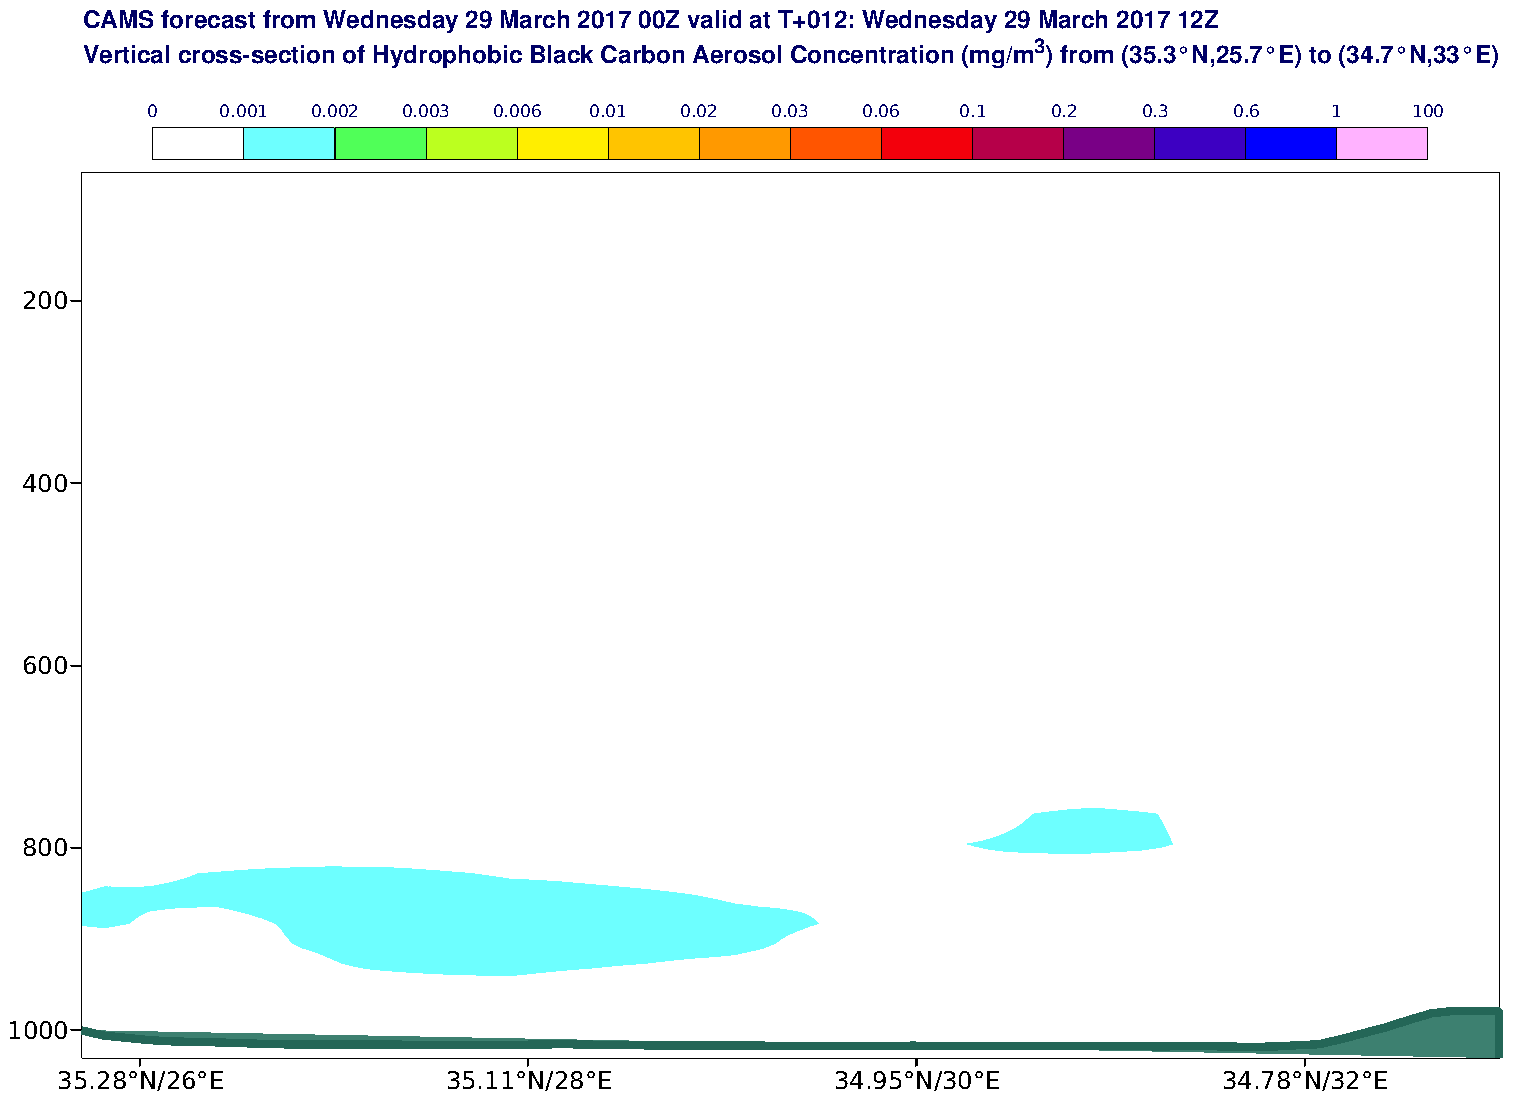 Vertical cross-section of Hydrophobic Black Carbon Aerosol Concentration (mg/m3) valid at T12 - 2017-03-29 12:00